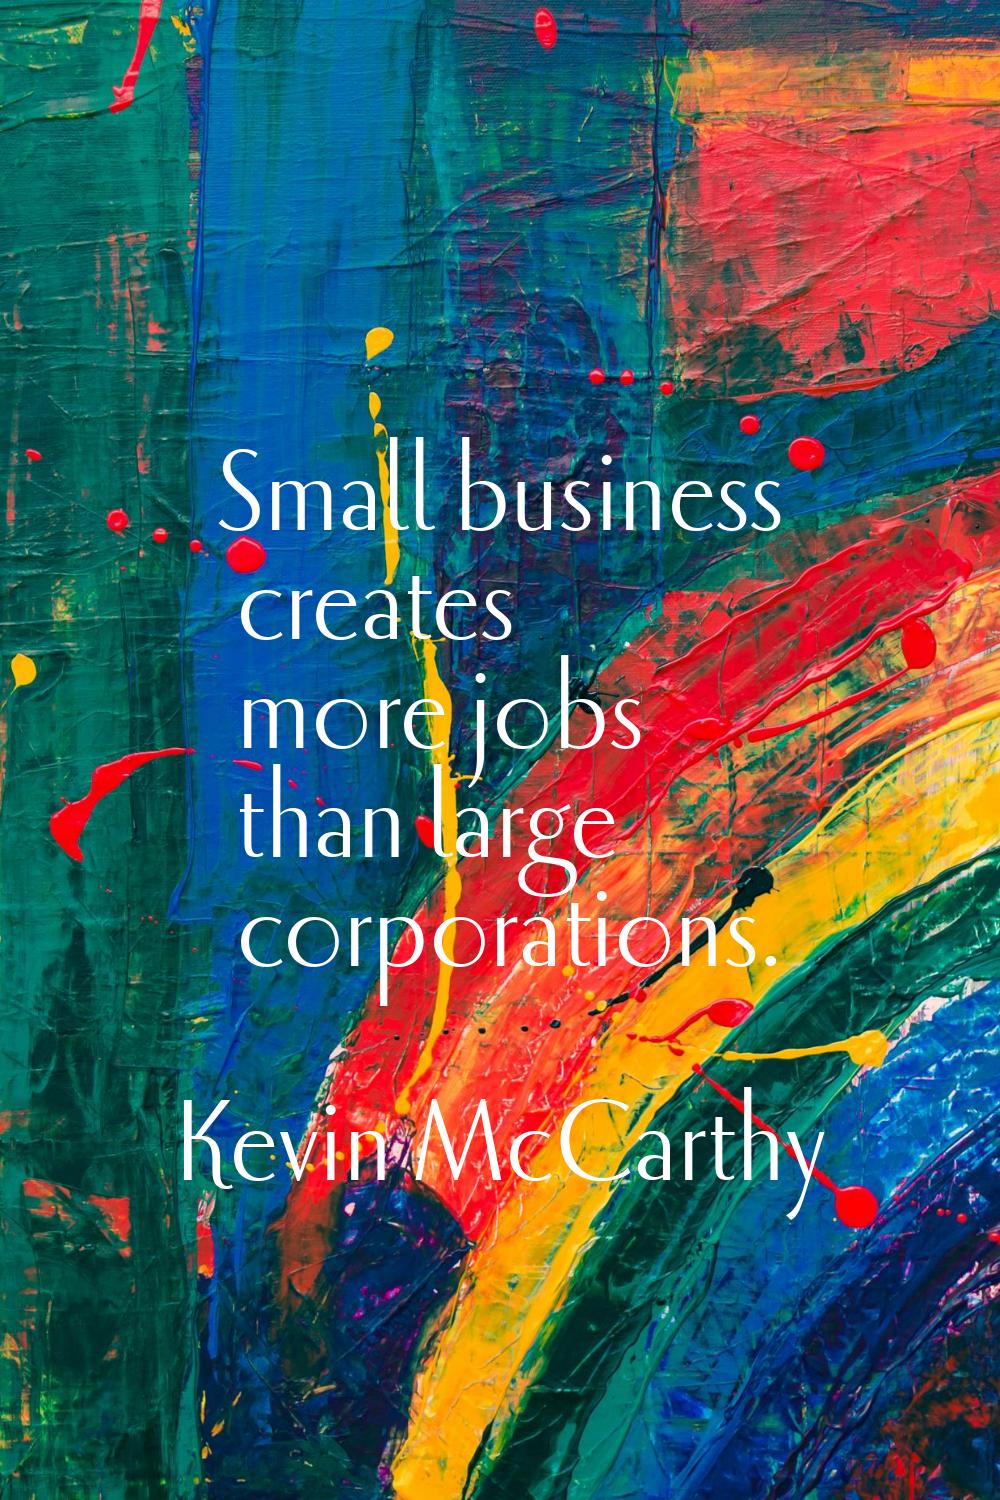 Small business creates more jobs than large corporations.